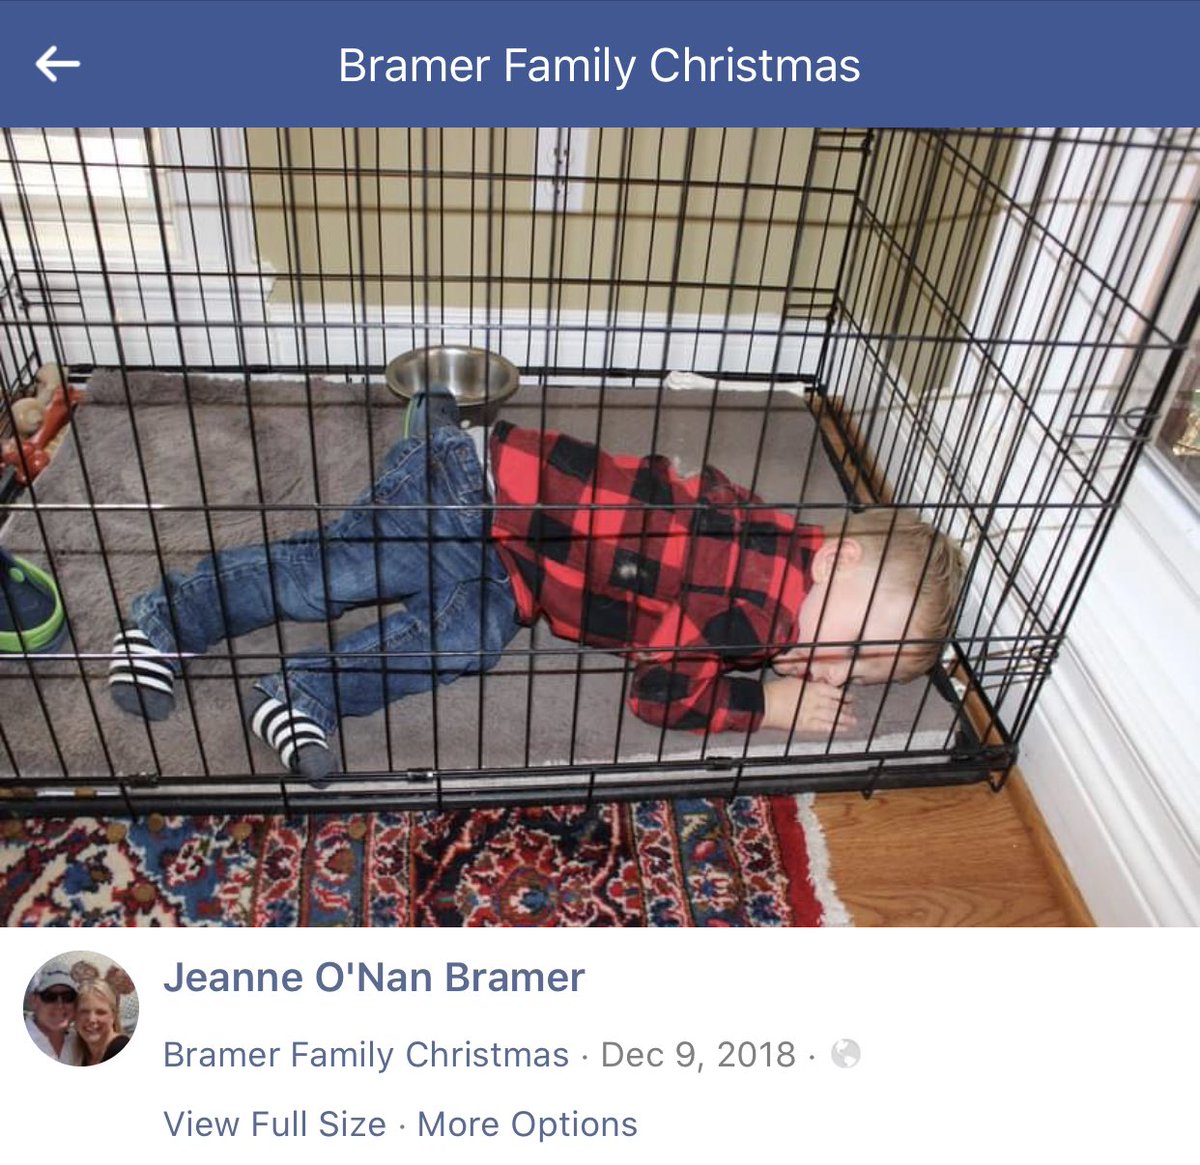 Makenze’s social media accounts are locked. The parents accounts are pretty tame.There is this one family photo of a one kid sleeping in an animal cage by himself.